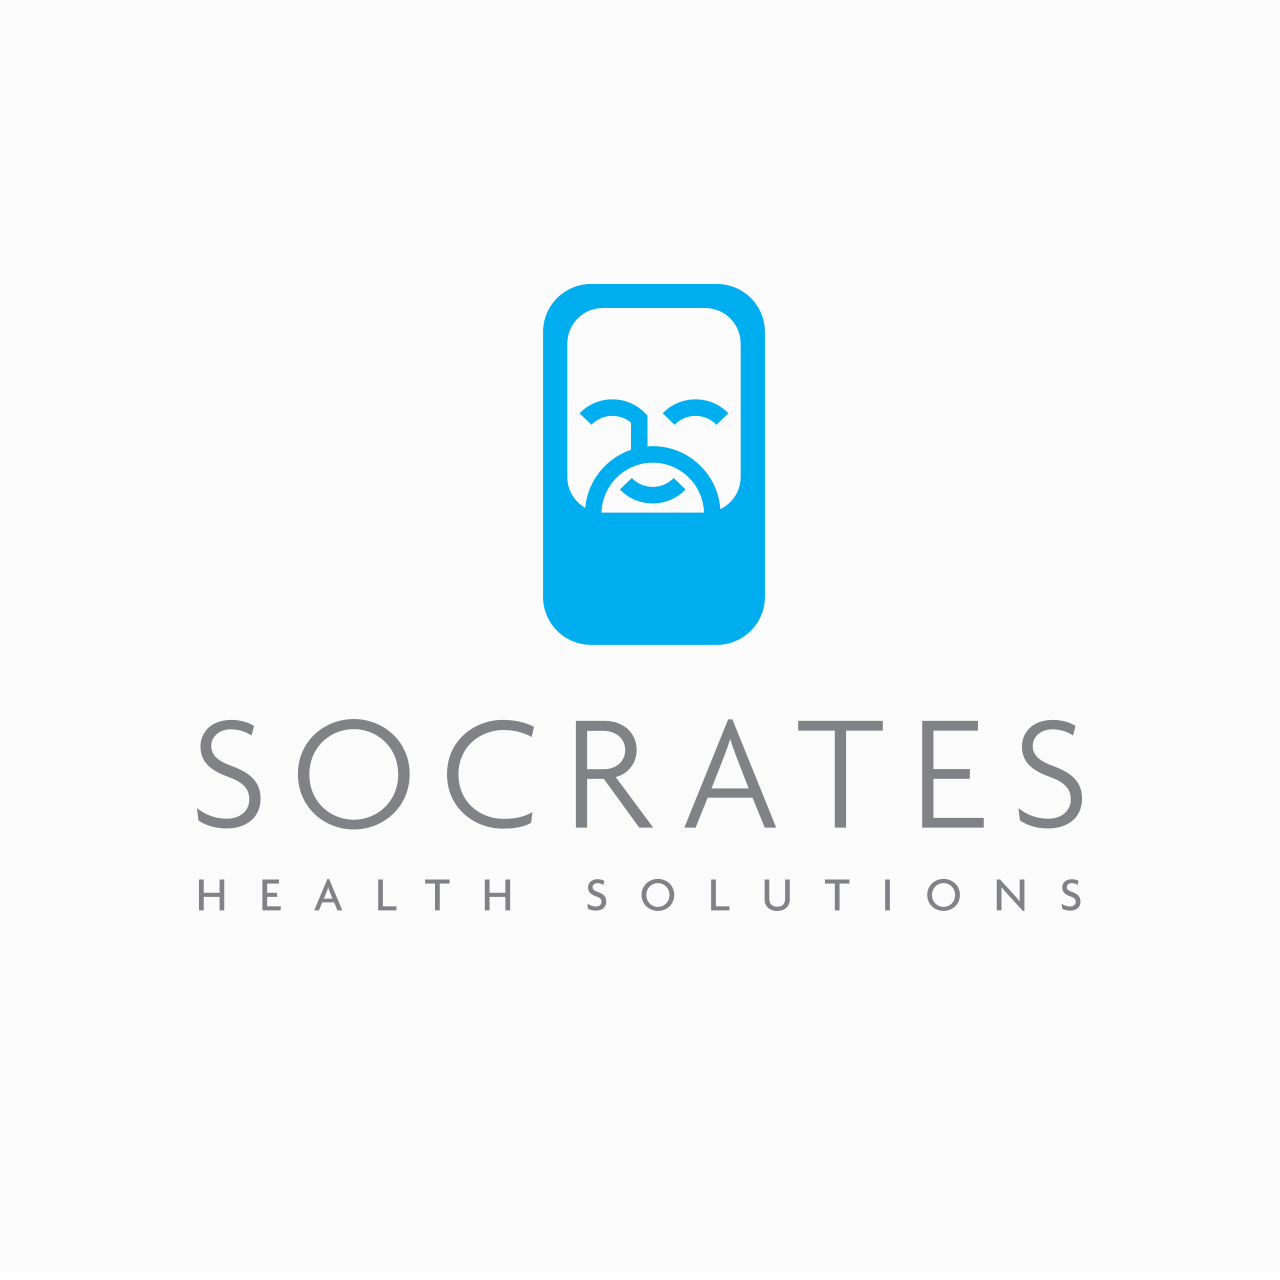 Logo design and type treatment for Socrates Health Solutions